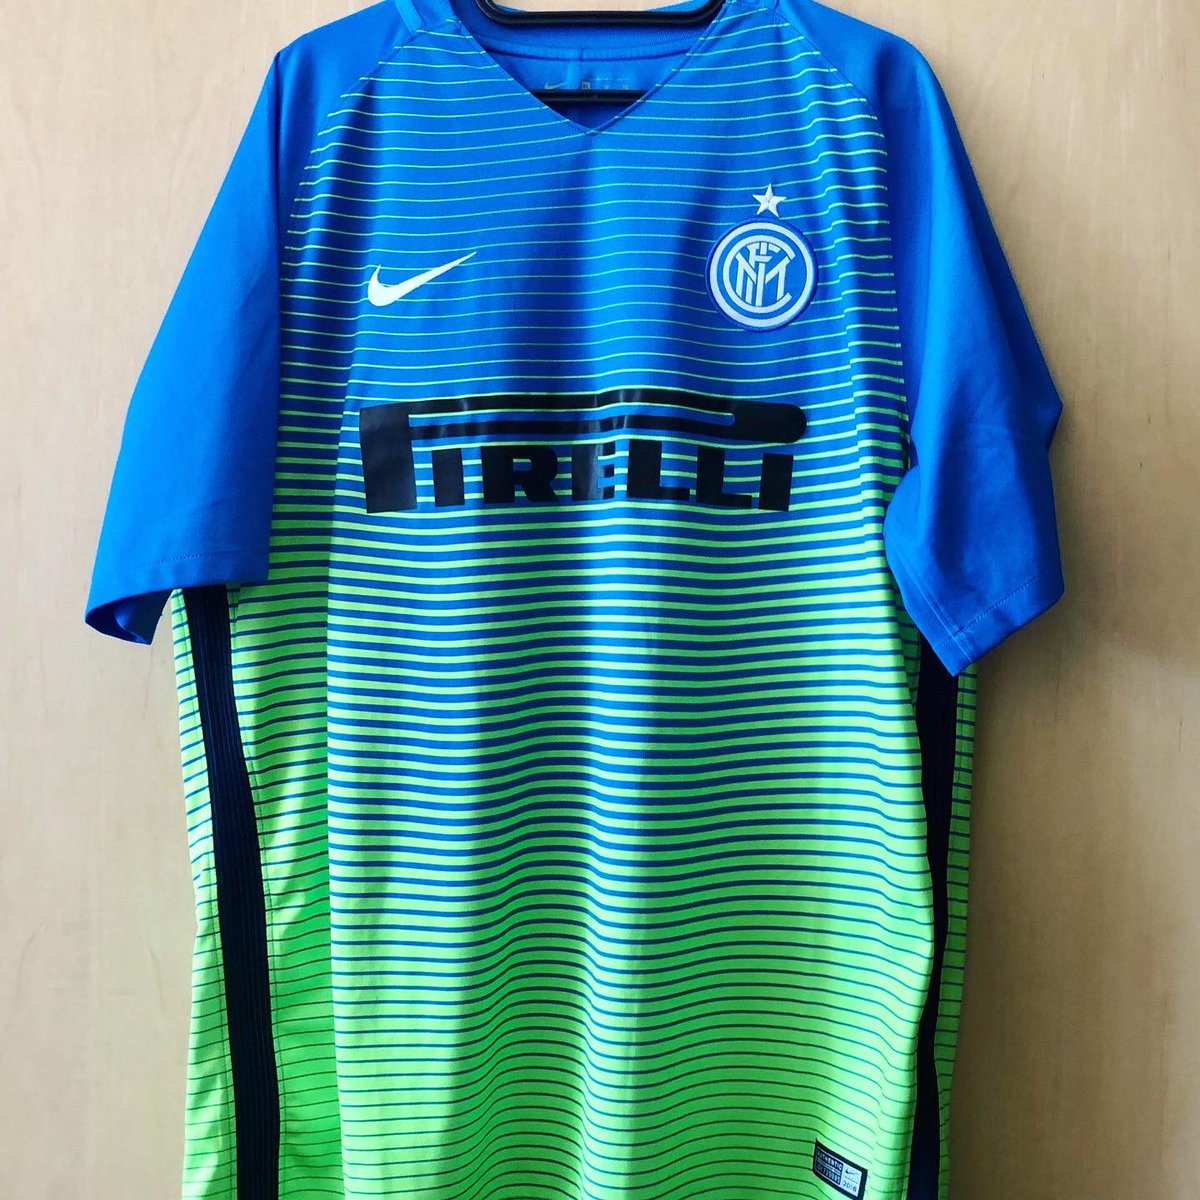 . @InterThird Kit, 2016/17NikeSometimes I wear an Inter shirt too. This one was quite controversial, renamed “sprite” because of its colours by its critics. Gabigol, in his awful season at Inter, scored his first and only goal while wearing this kit. #HomeShirt  #FootballShirt